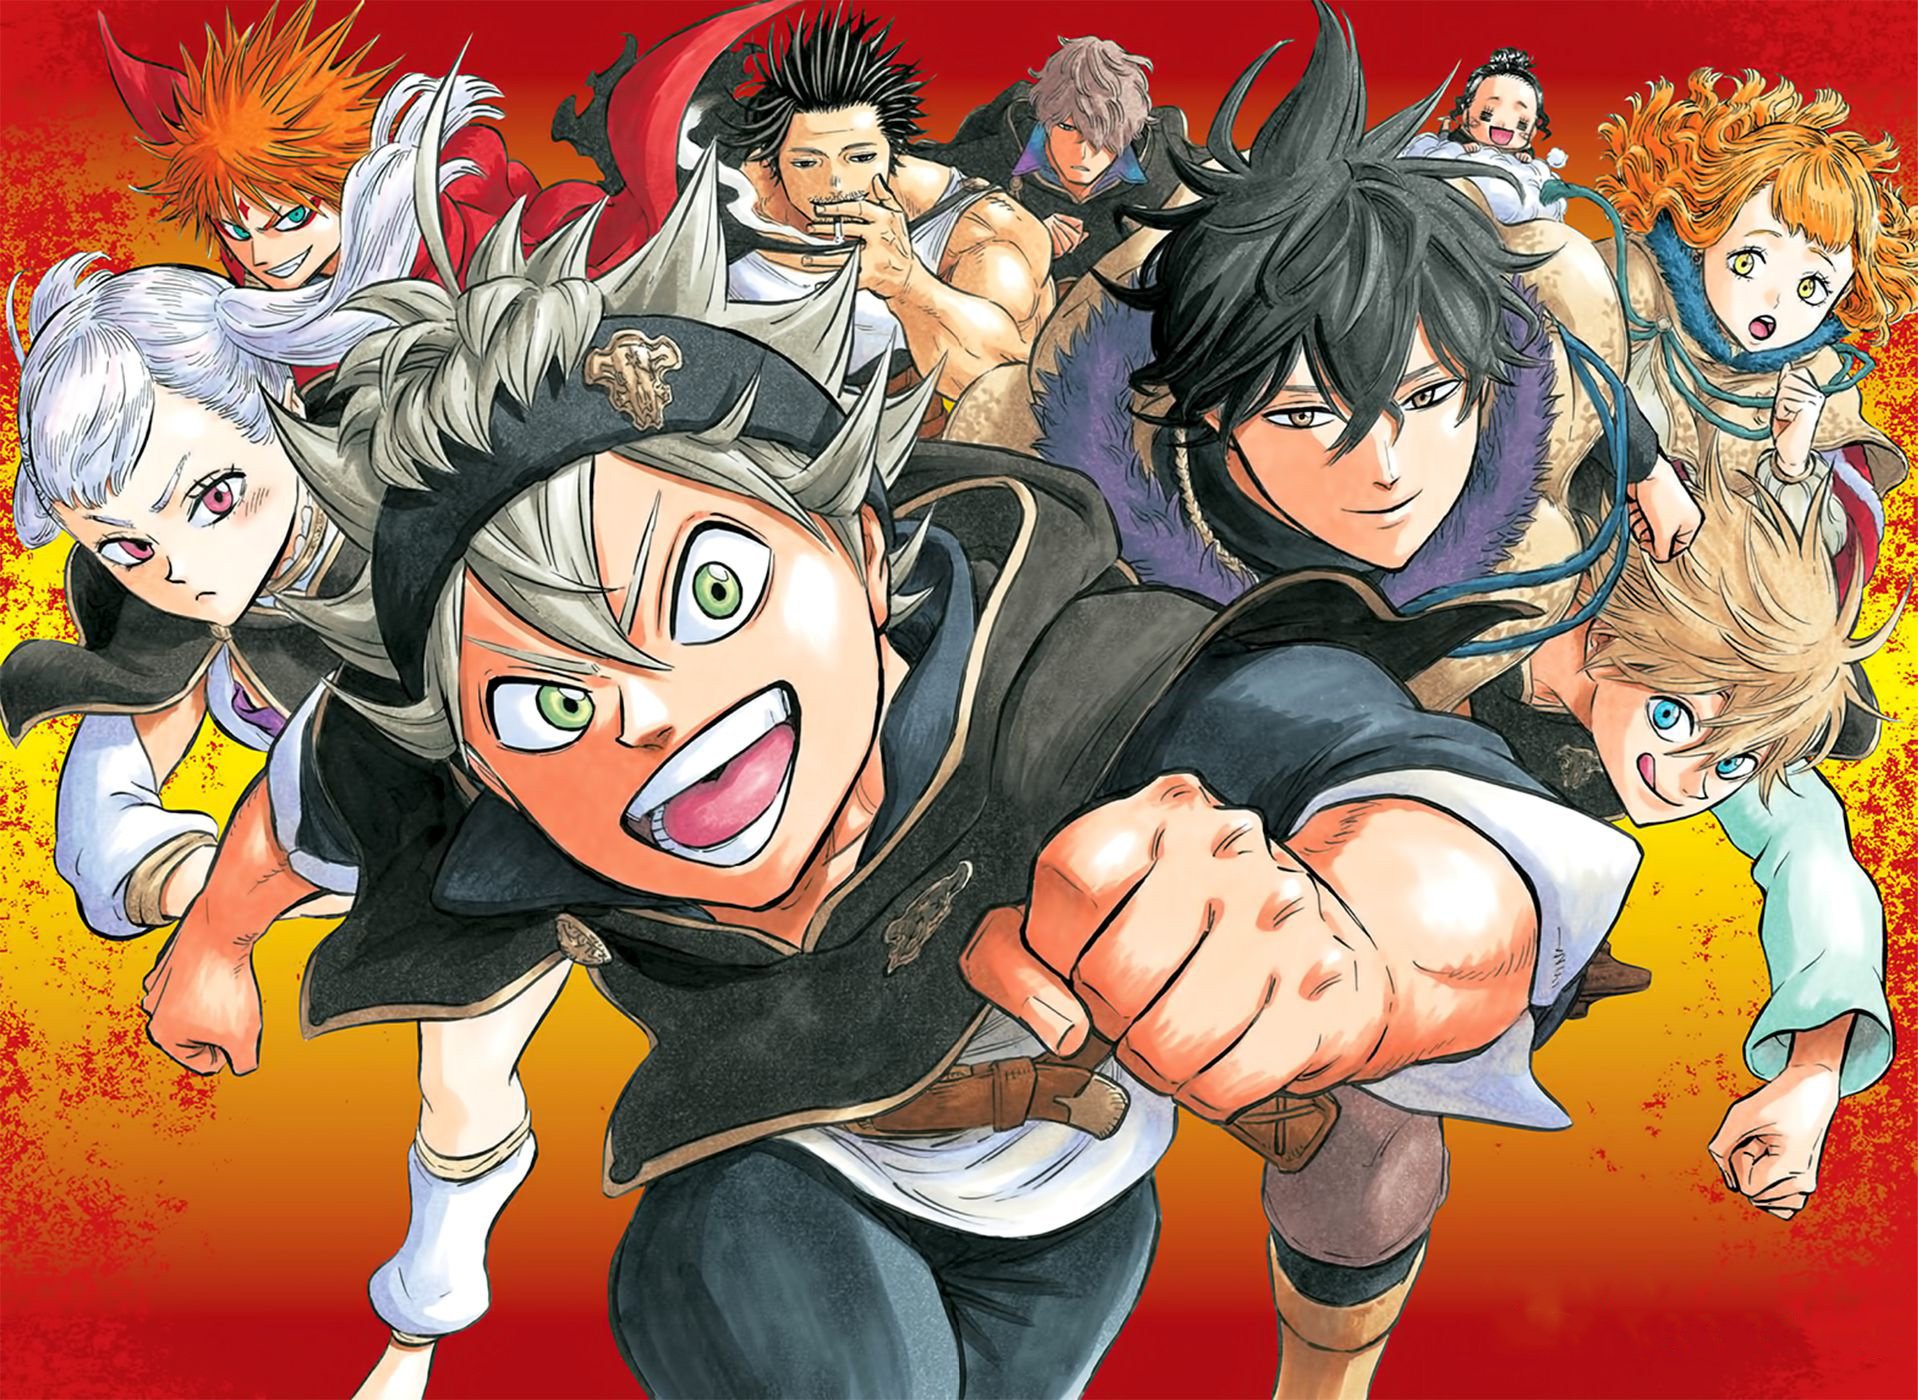 Black Clover Chapter 246 Release Date, Raw Scans and Read Online